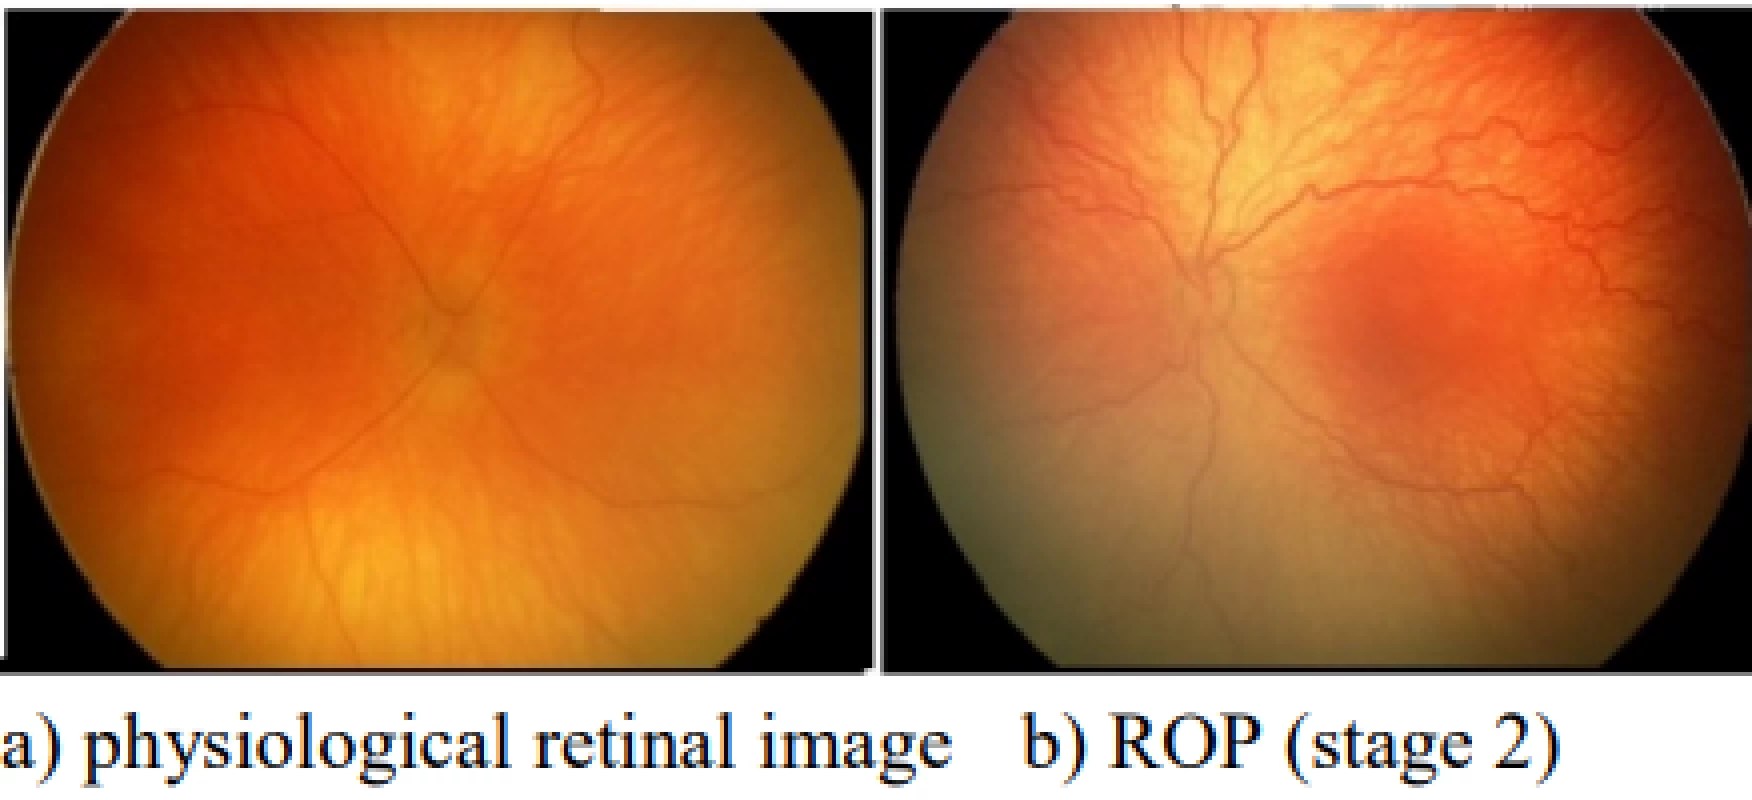  a) Retinal image with physiological blood
vessels, b) retinal image with ROP (stage 2) with
tortuosity